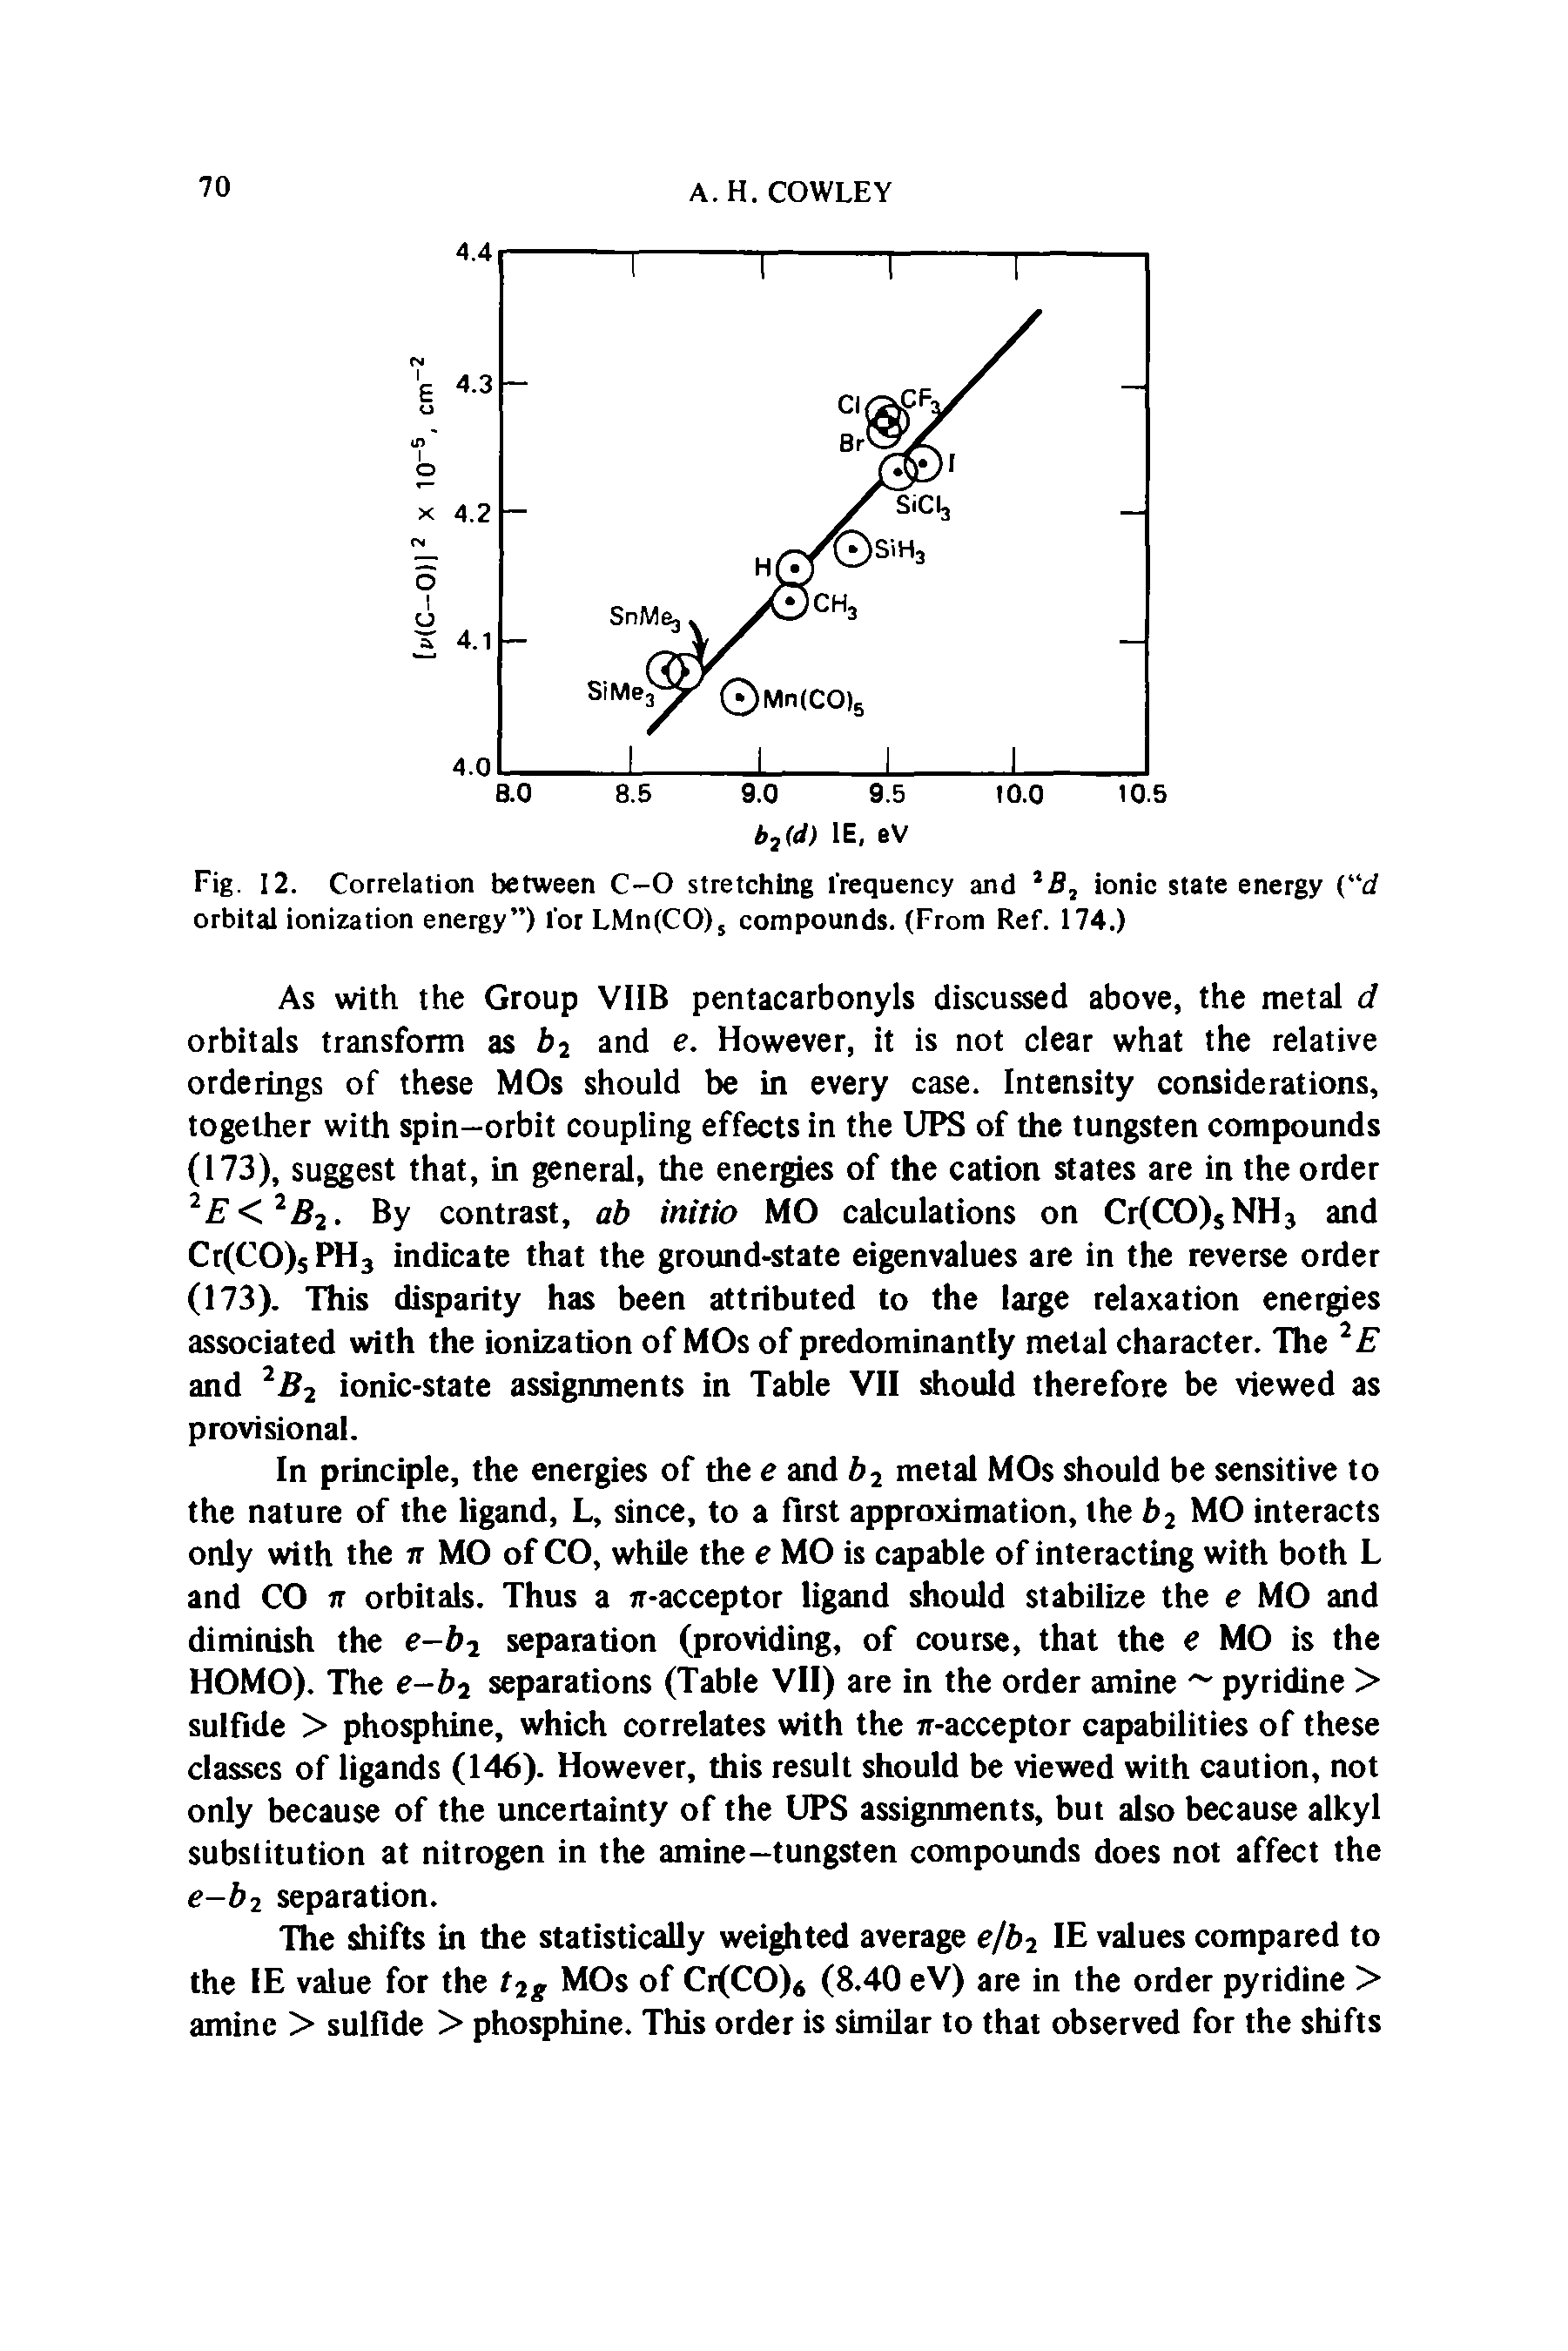 Fig. 12. Correlation between C-O stretching frequency and B, ionic state energy ( d orbital ionization energy ) l or LMn(CO)s compounds. (From Ref. 174.)...